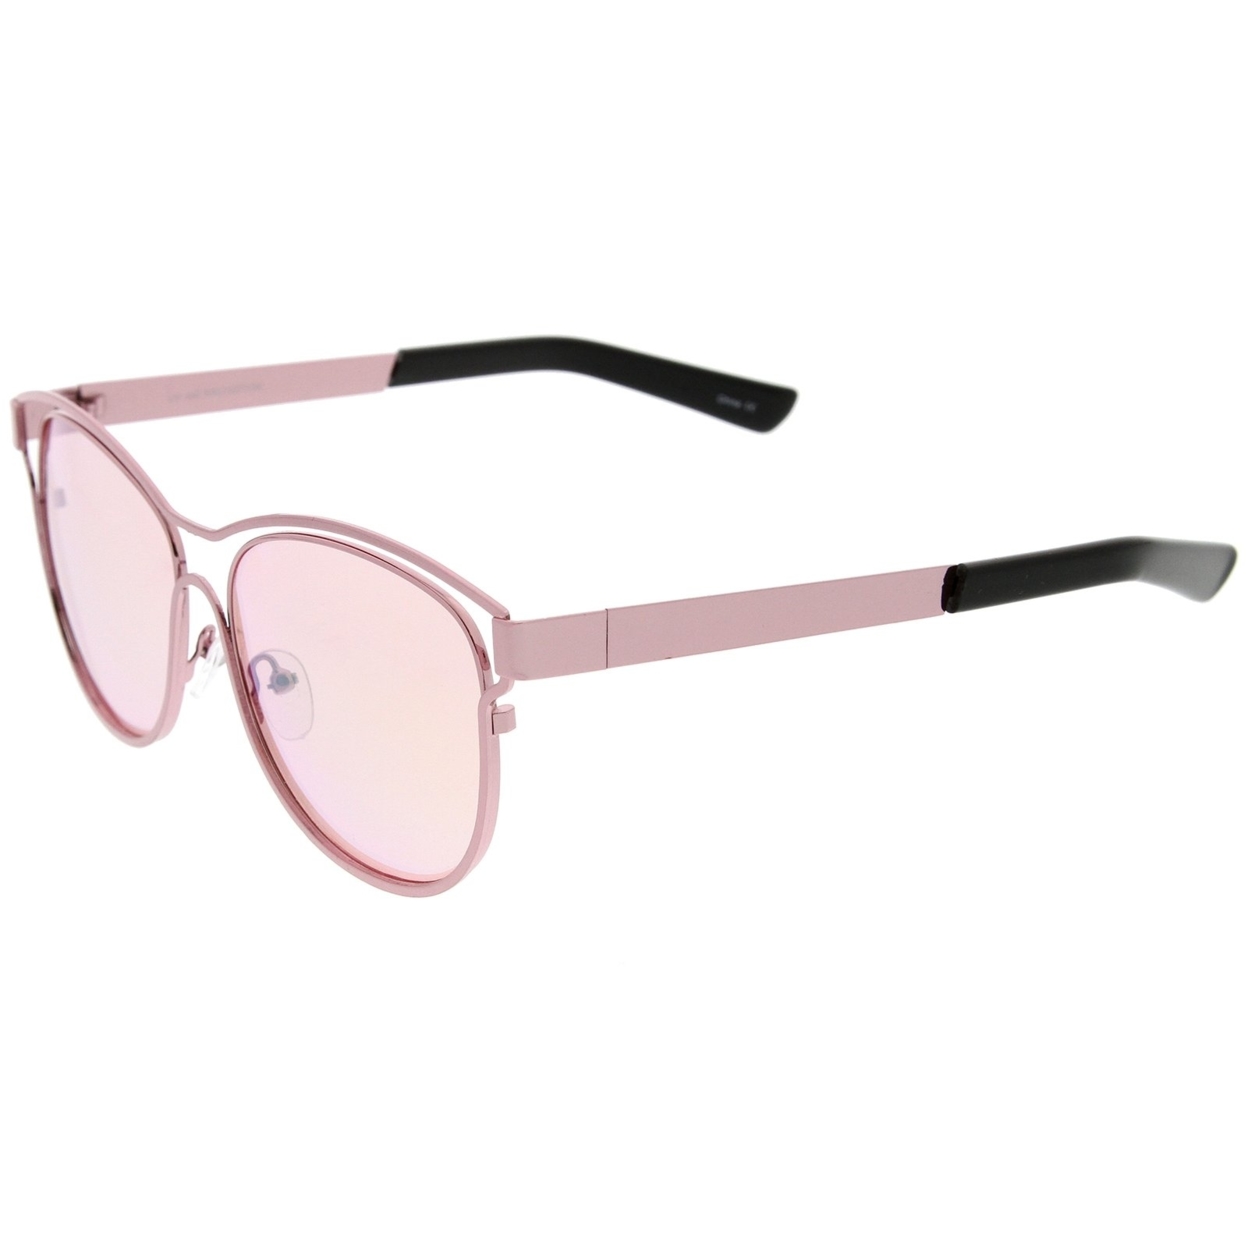 Modern Open Metal Frame Colored Mirror Lens Horn Rimmed Sunglasses 56mm - Pink / Pink Mirror